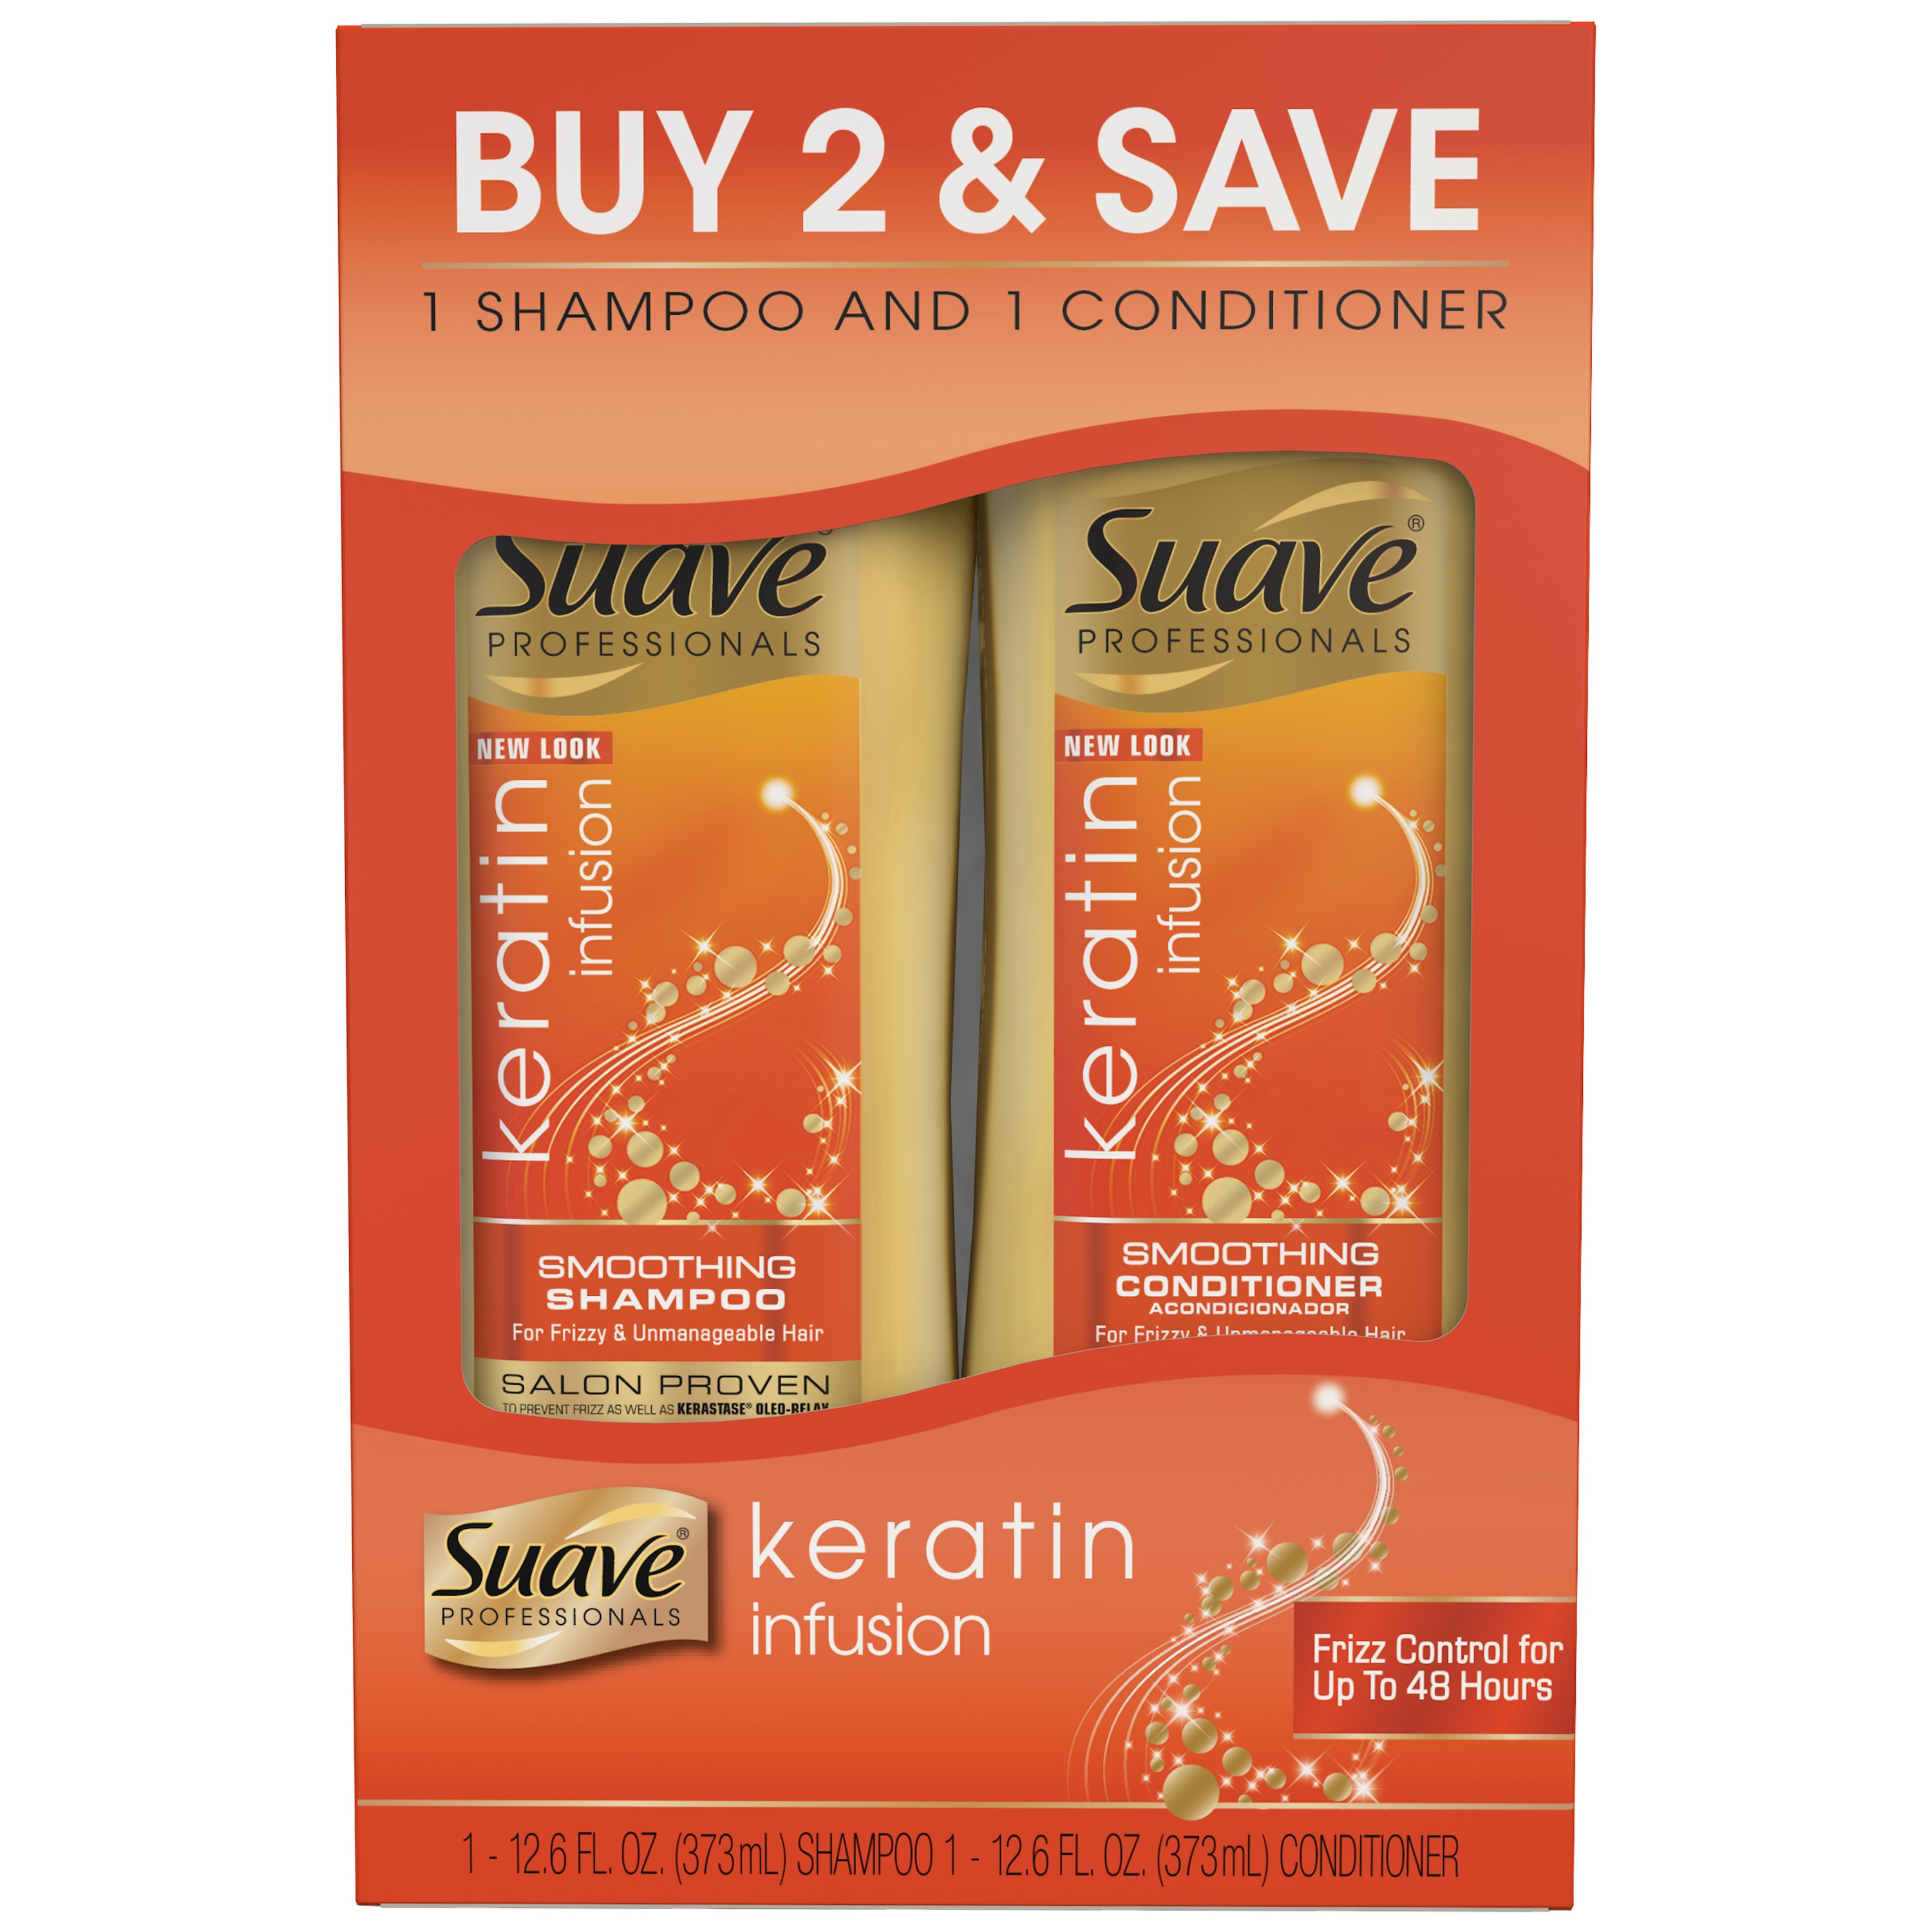 Suave Professionals Smoothing Shampoo and Conditioner, Keratin Infusion, 12.6 Oz, Twin Pack - image 1 of 7